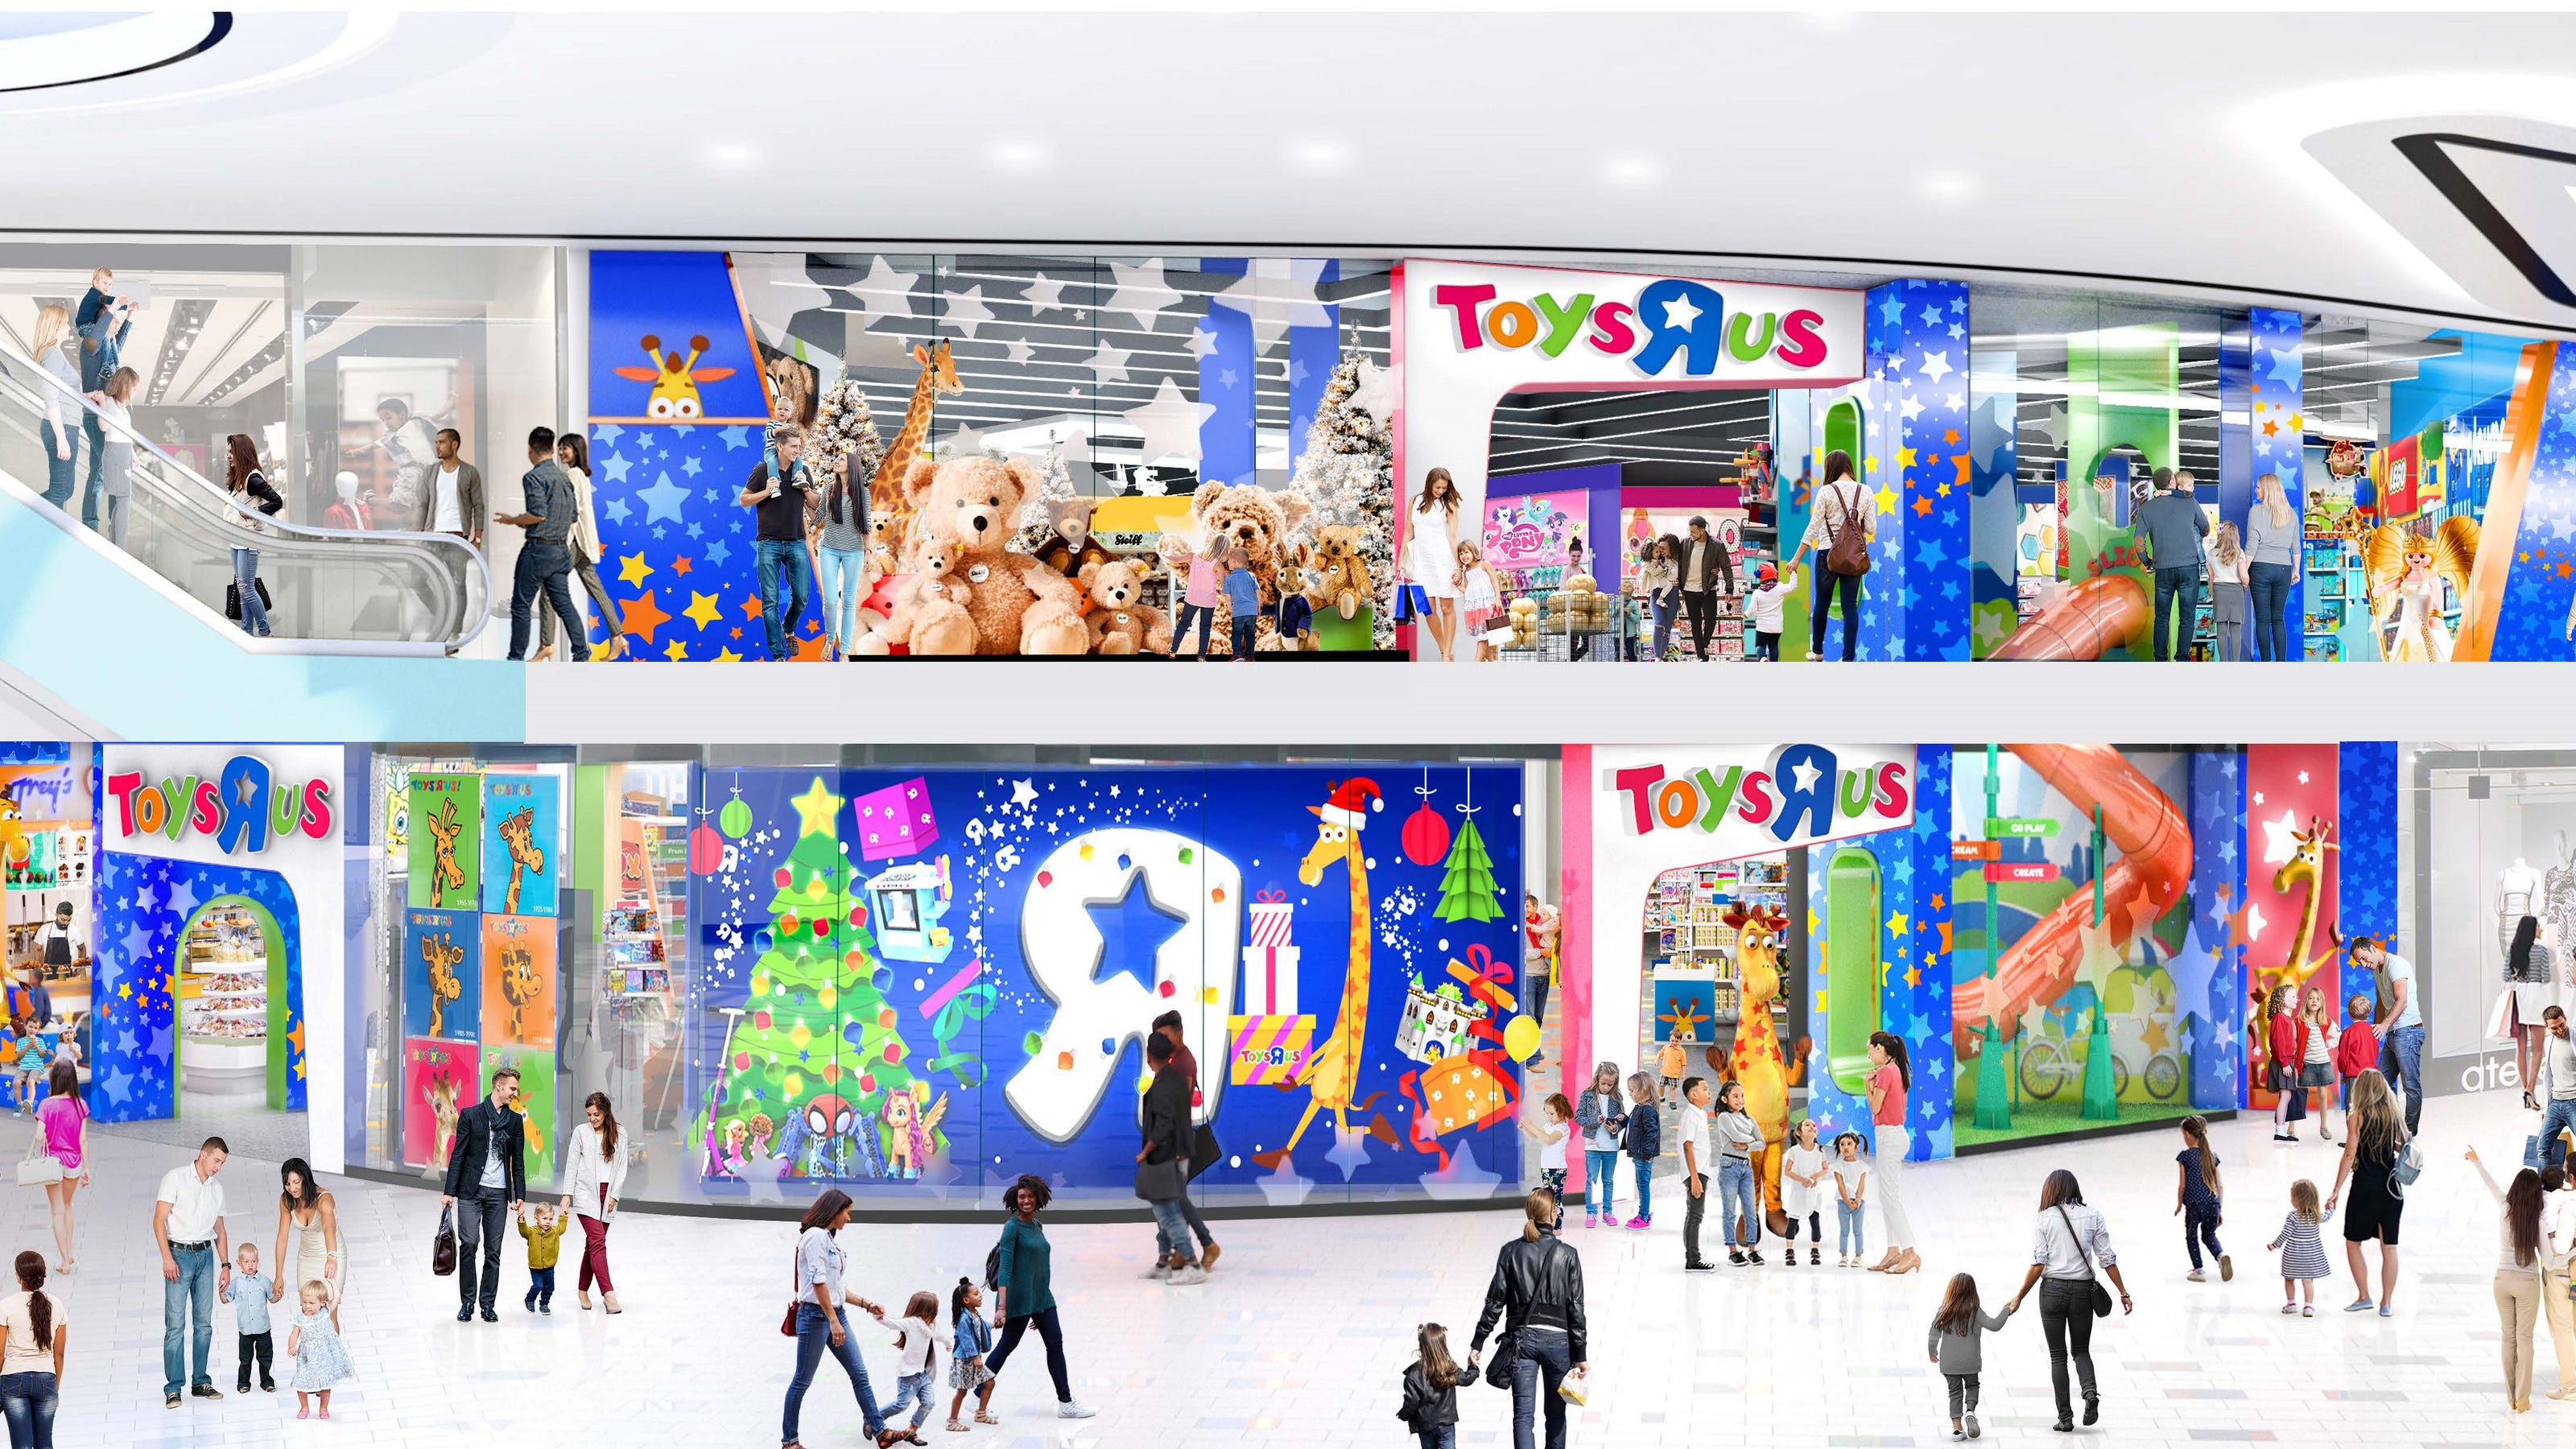 Toys R Us to open in New Jersey American Dream with slide, ice cream